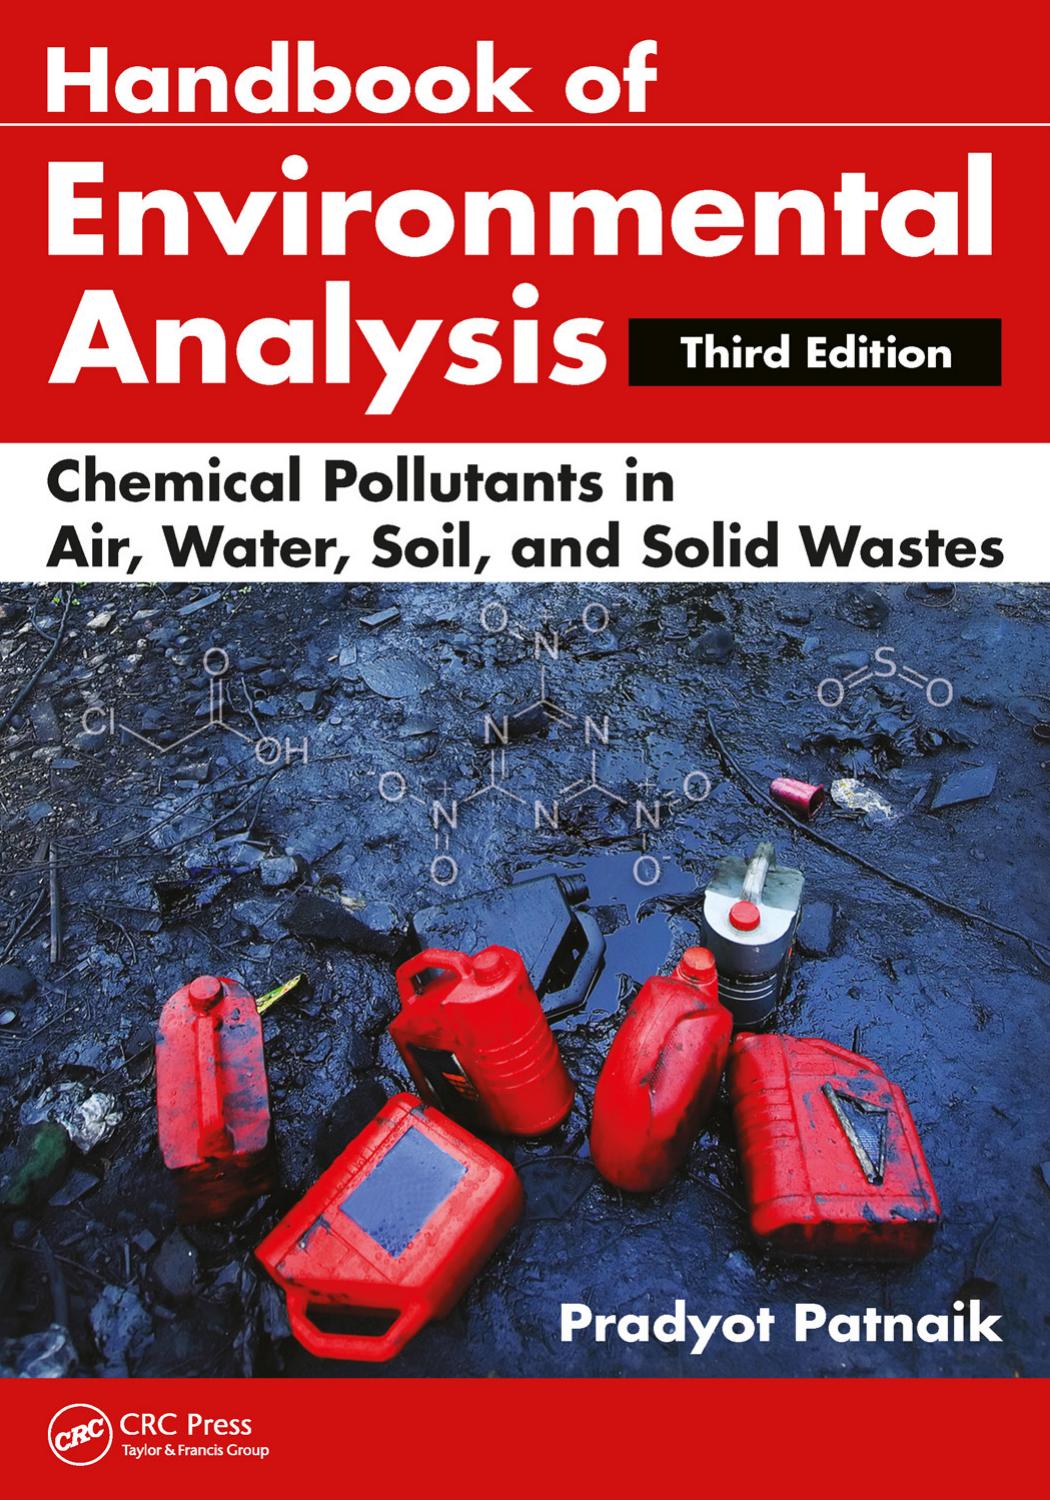 Handbook of Environmental Analysis: Chemical Pollutants in Air, Water, Soil, and Solid Wastes, Third Edition